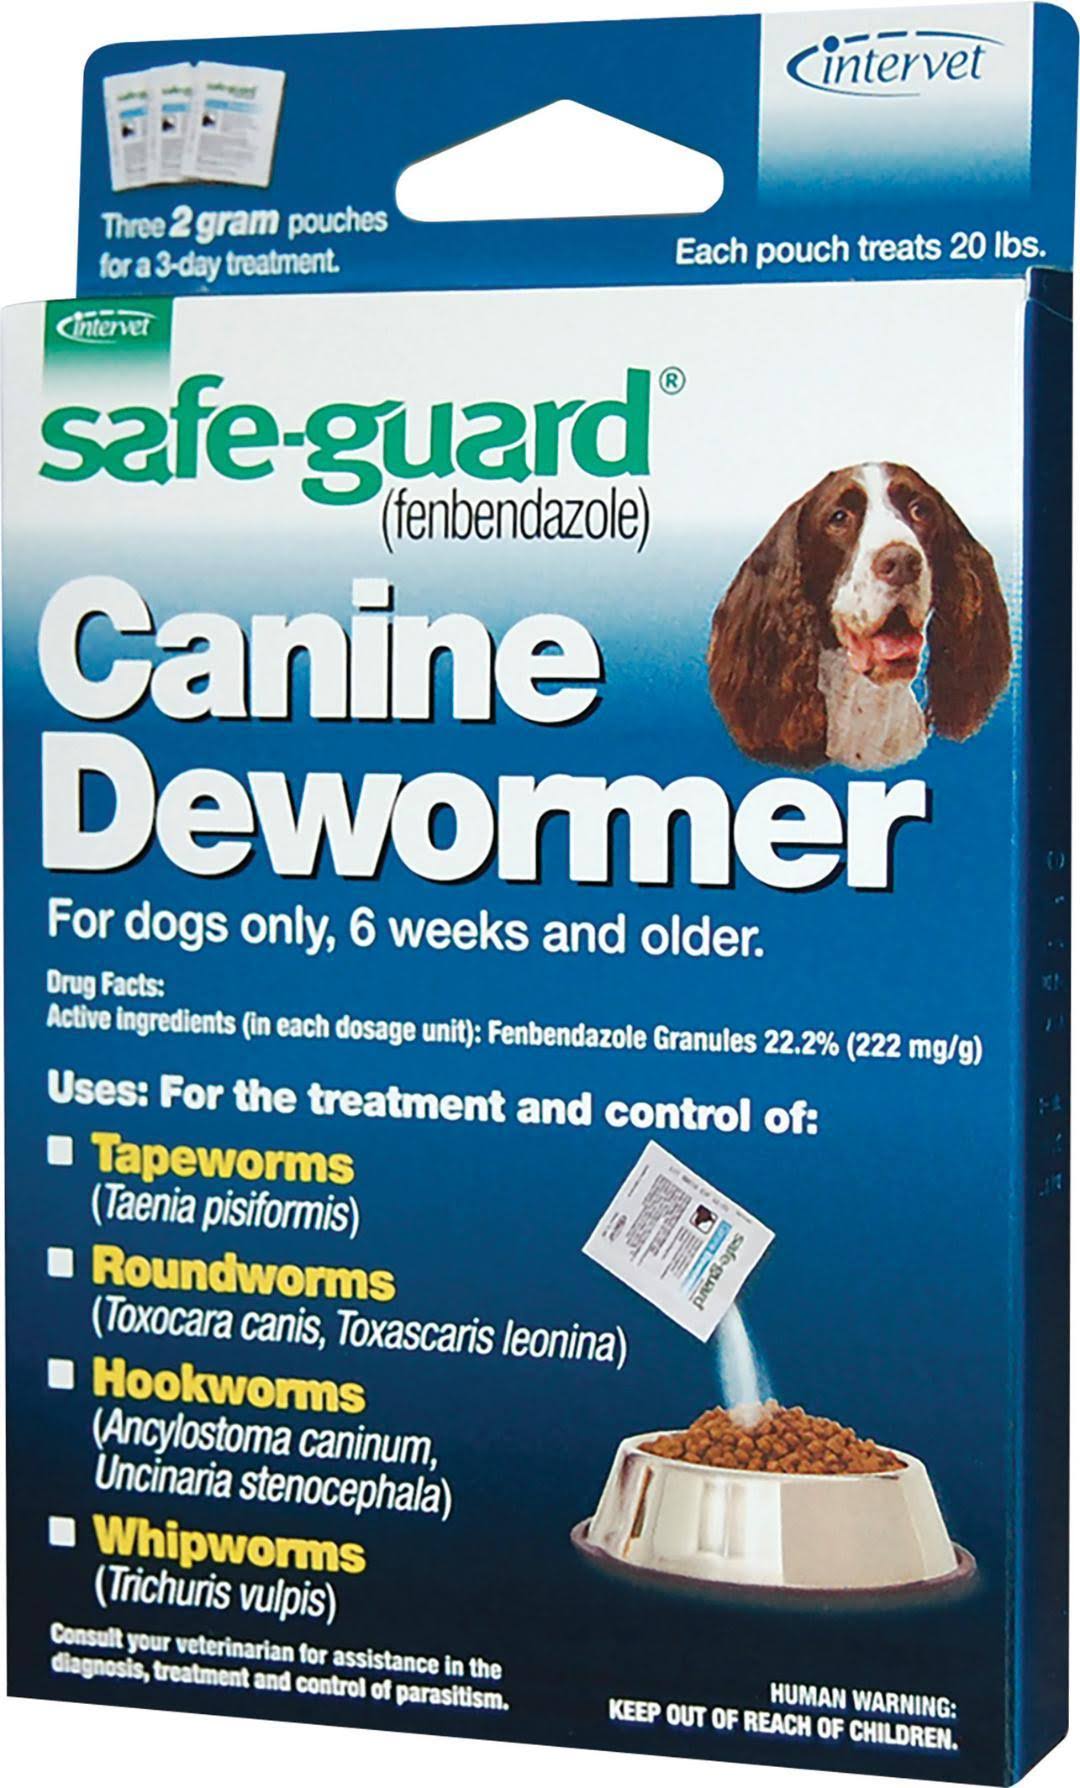 8 in 1 Safe Guard Canine Dewormer for Dogs - for 6 Weeks and Older, 2g Pouches, Pack of 3